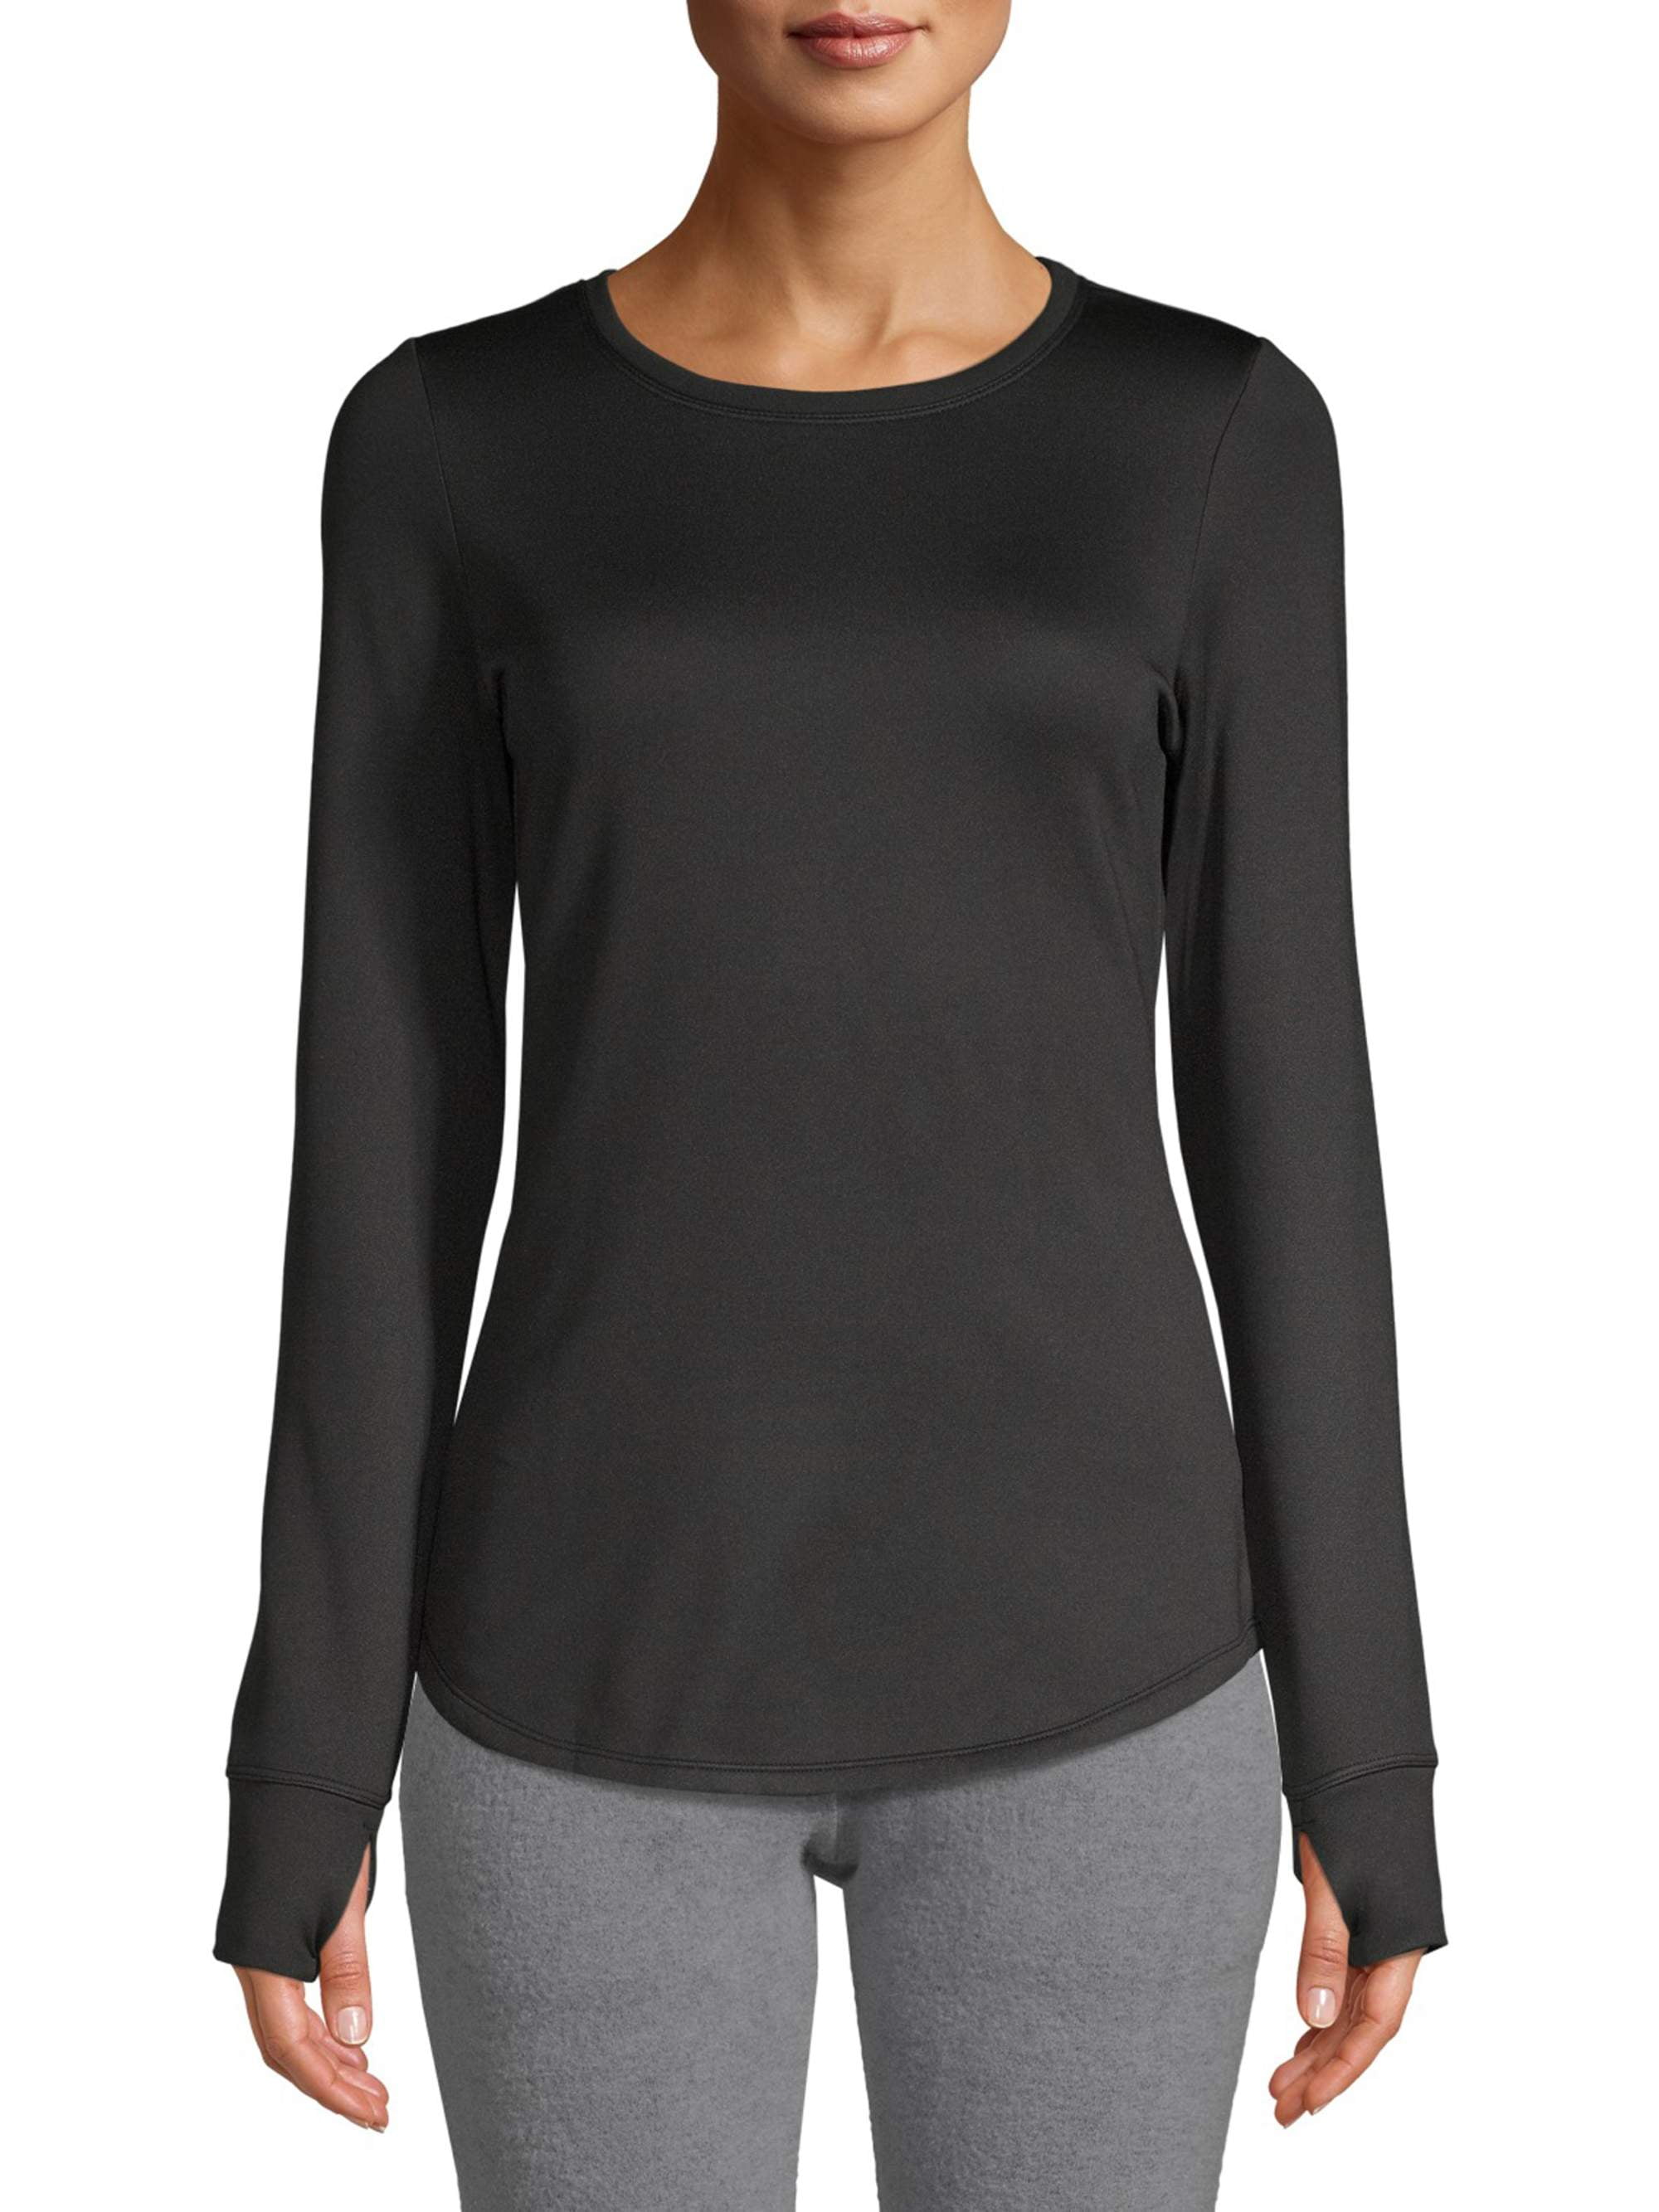 ClimateRight by Cuddl Duds Women's Thermal Guard Base Layer Crew Neck ...